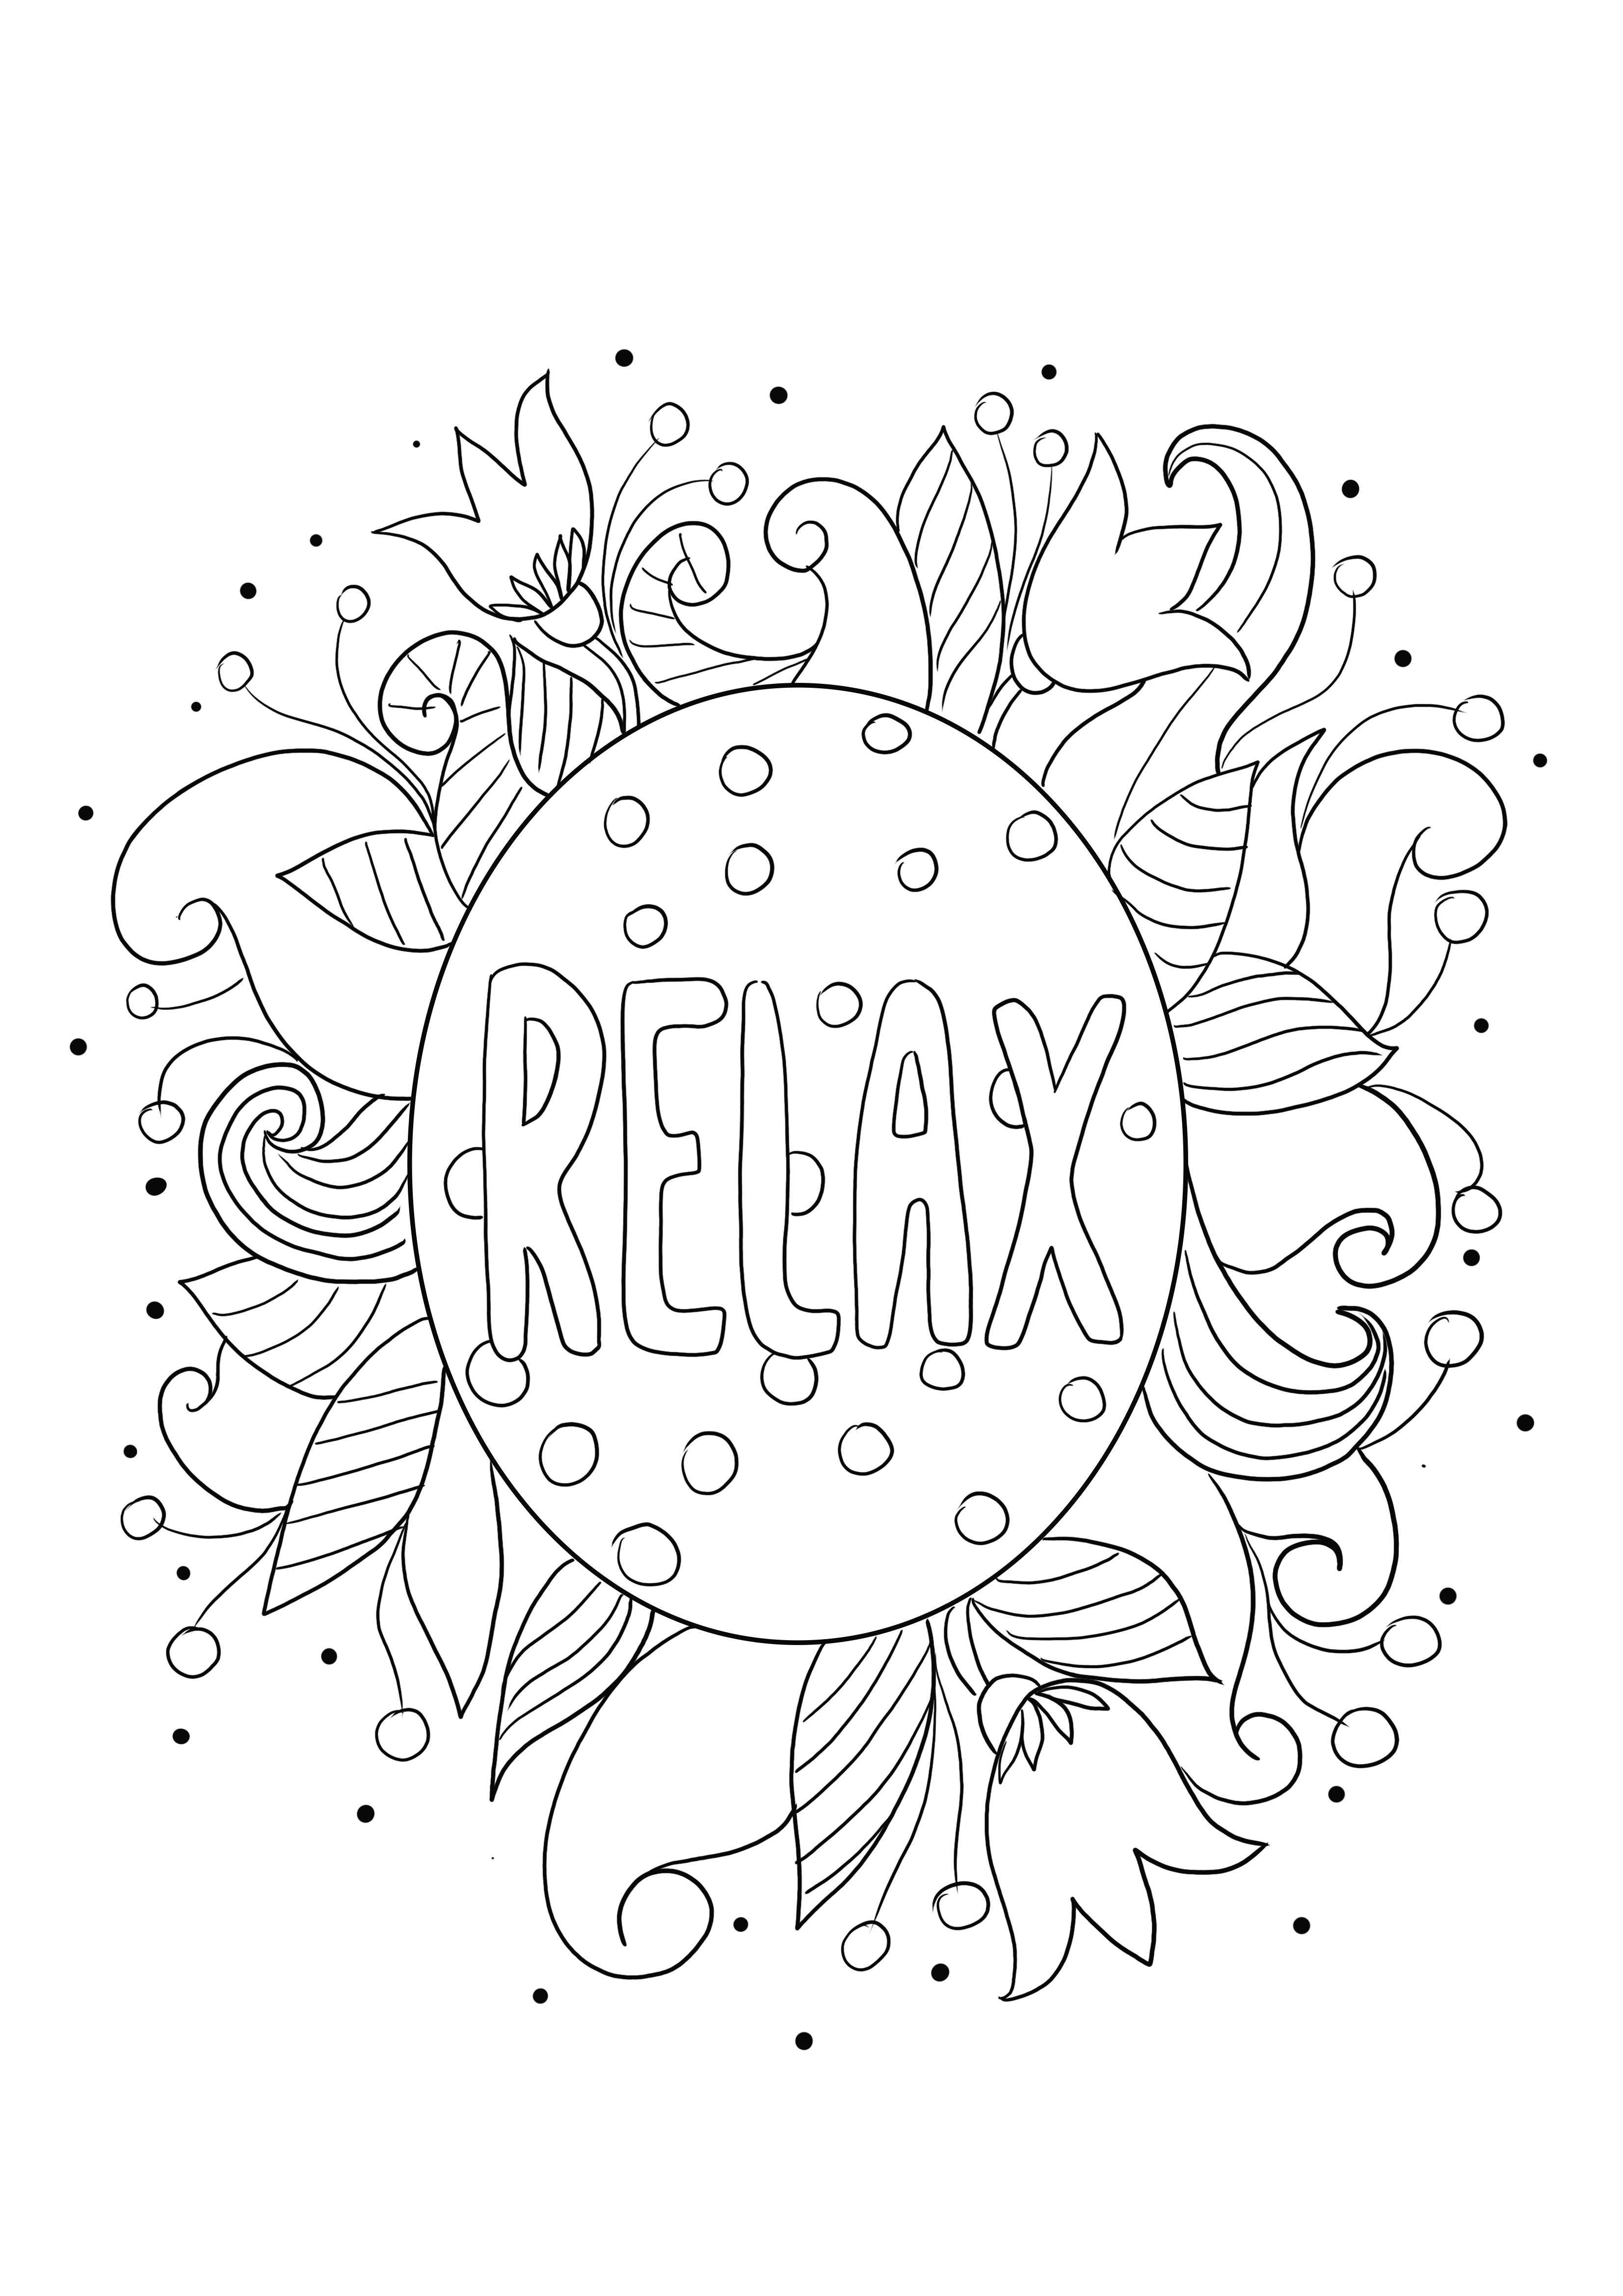 Relax word coloring sheet free to download and color to relax for kids